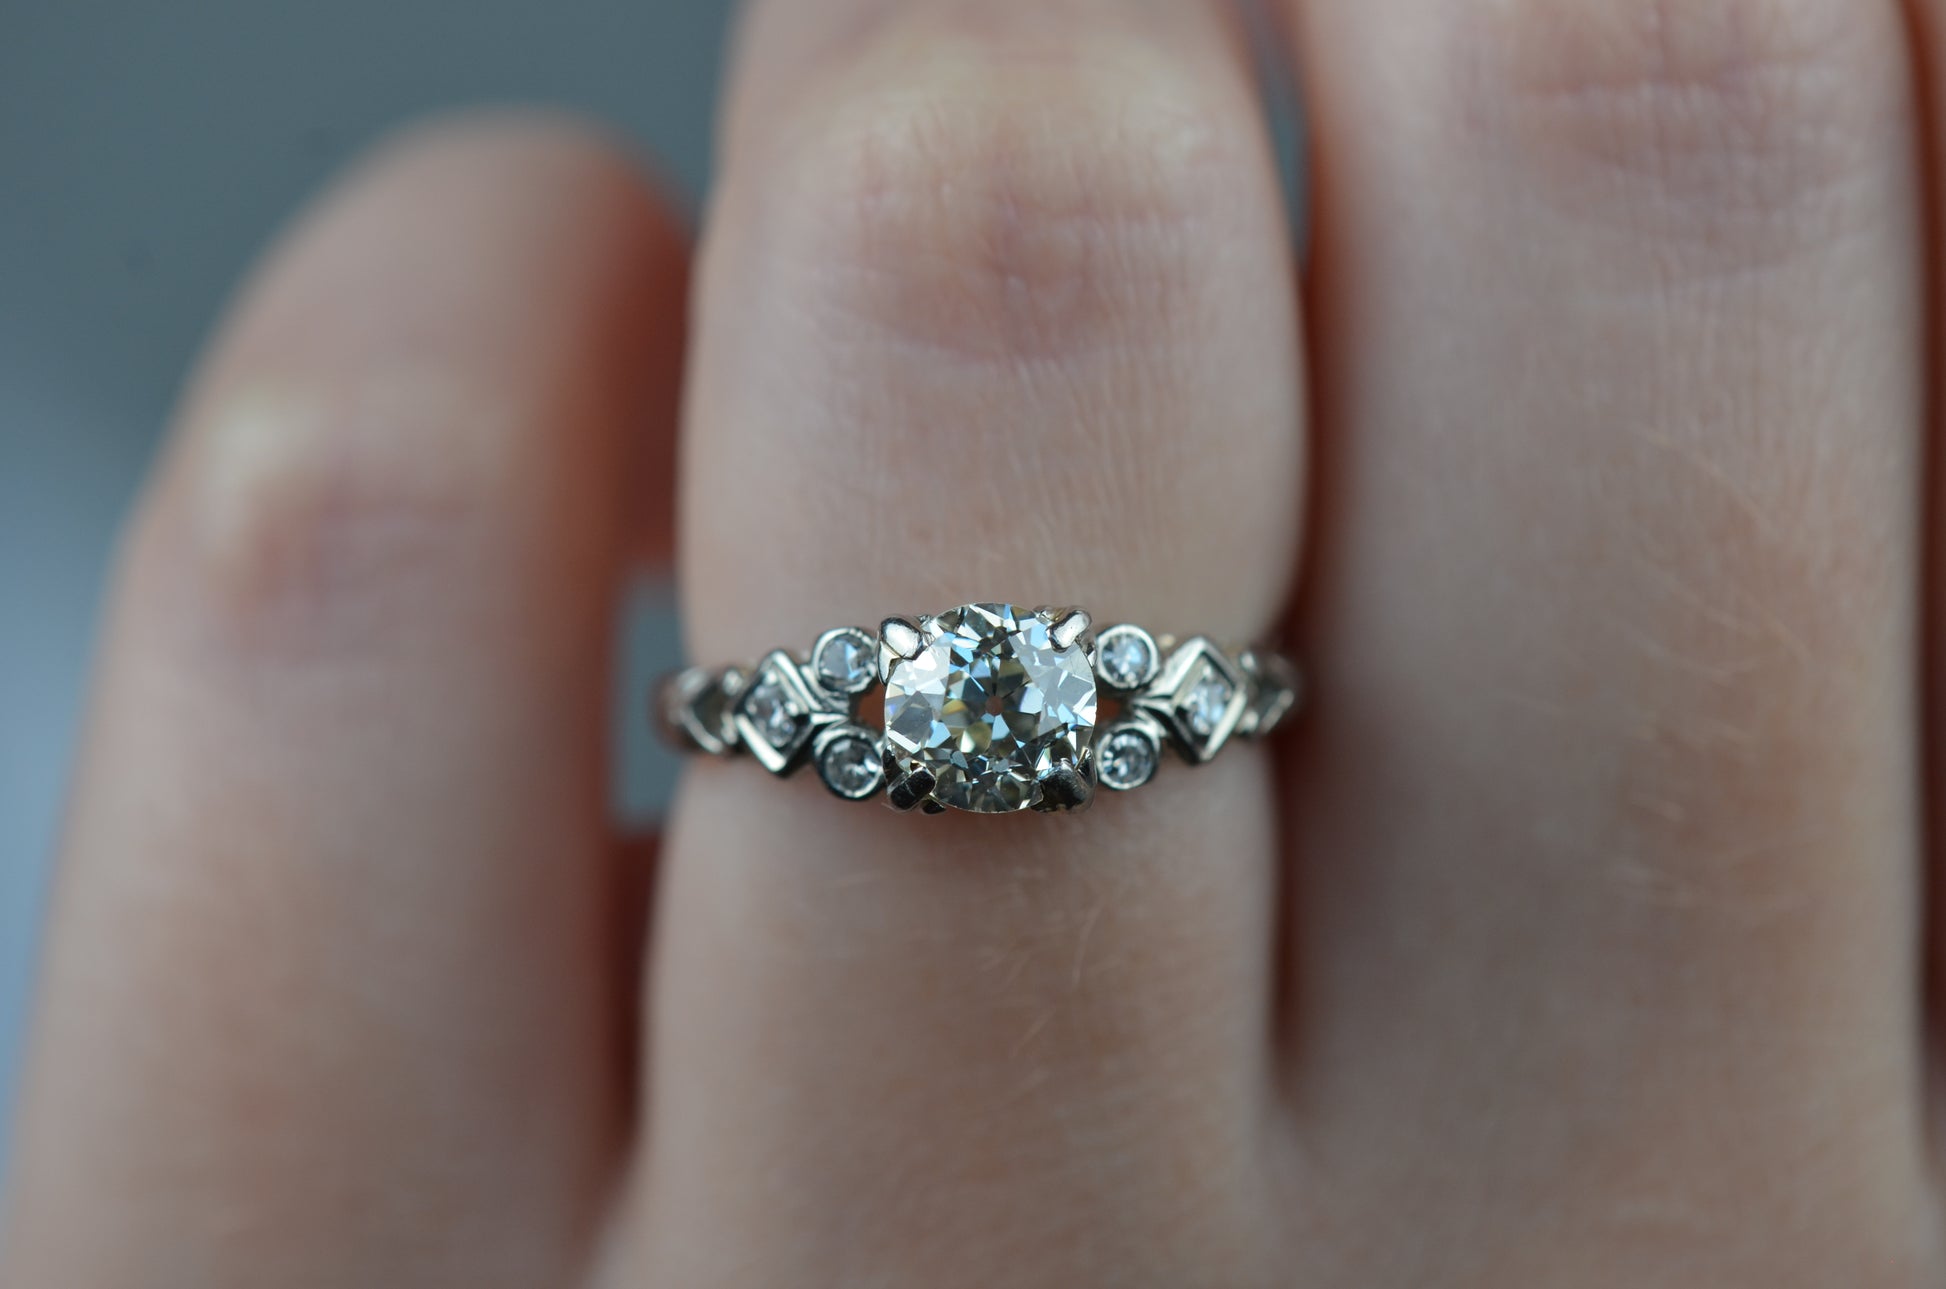 a head-on macro of the ring on a caucasian model's left ring finger. the ring is in crisp focus while the hand is slightly blurry. lighting is cool indoor lighting, making the ring and primary diamond appear whiter.